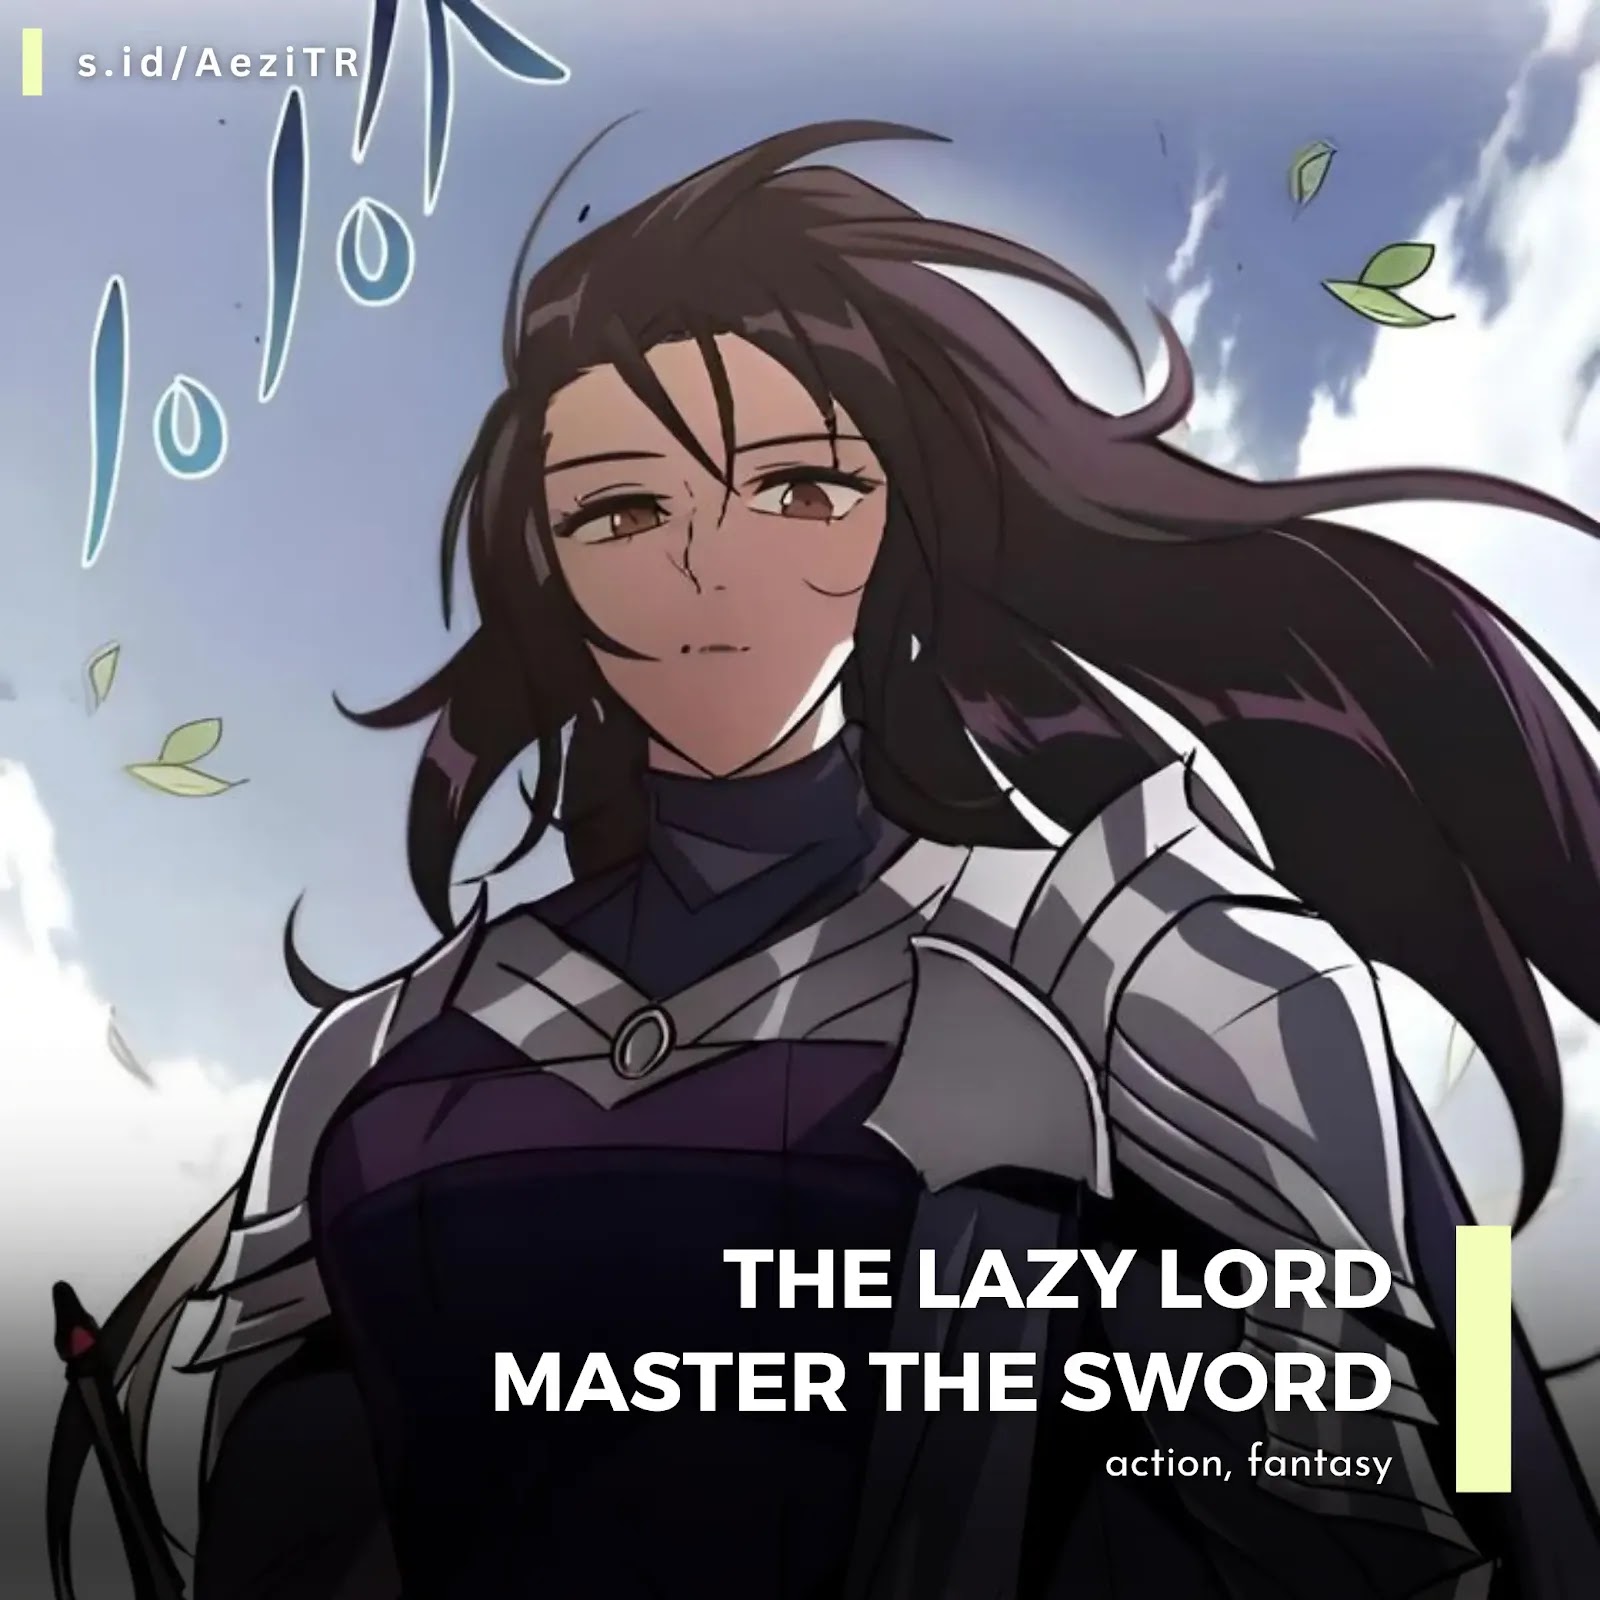 Review The Lazy Lord Master the Sword; Reformation of the Deadbeat Noble; The Lazy Prince Becomes a Genius - Rekomendasi Manhwa Terbaik Tahun 2021 @idyourzee